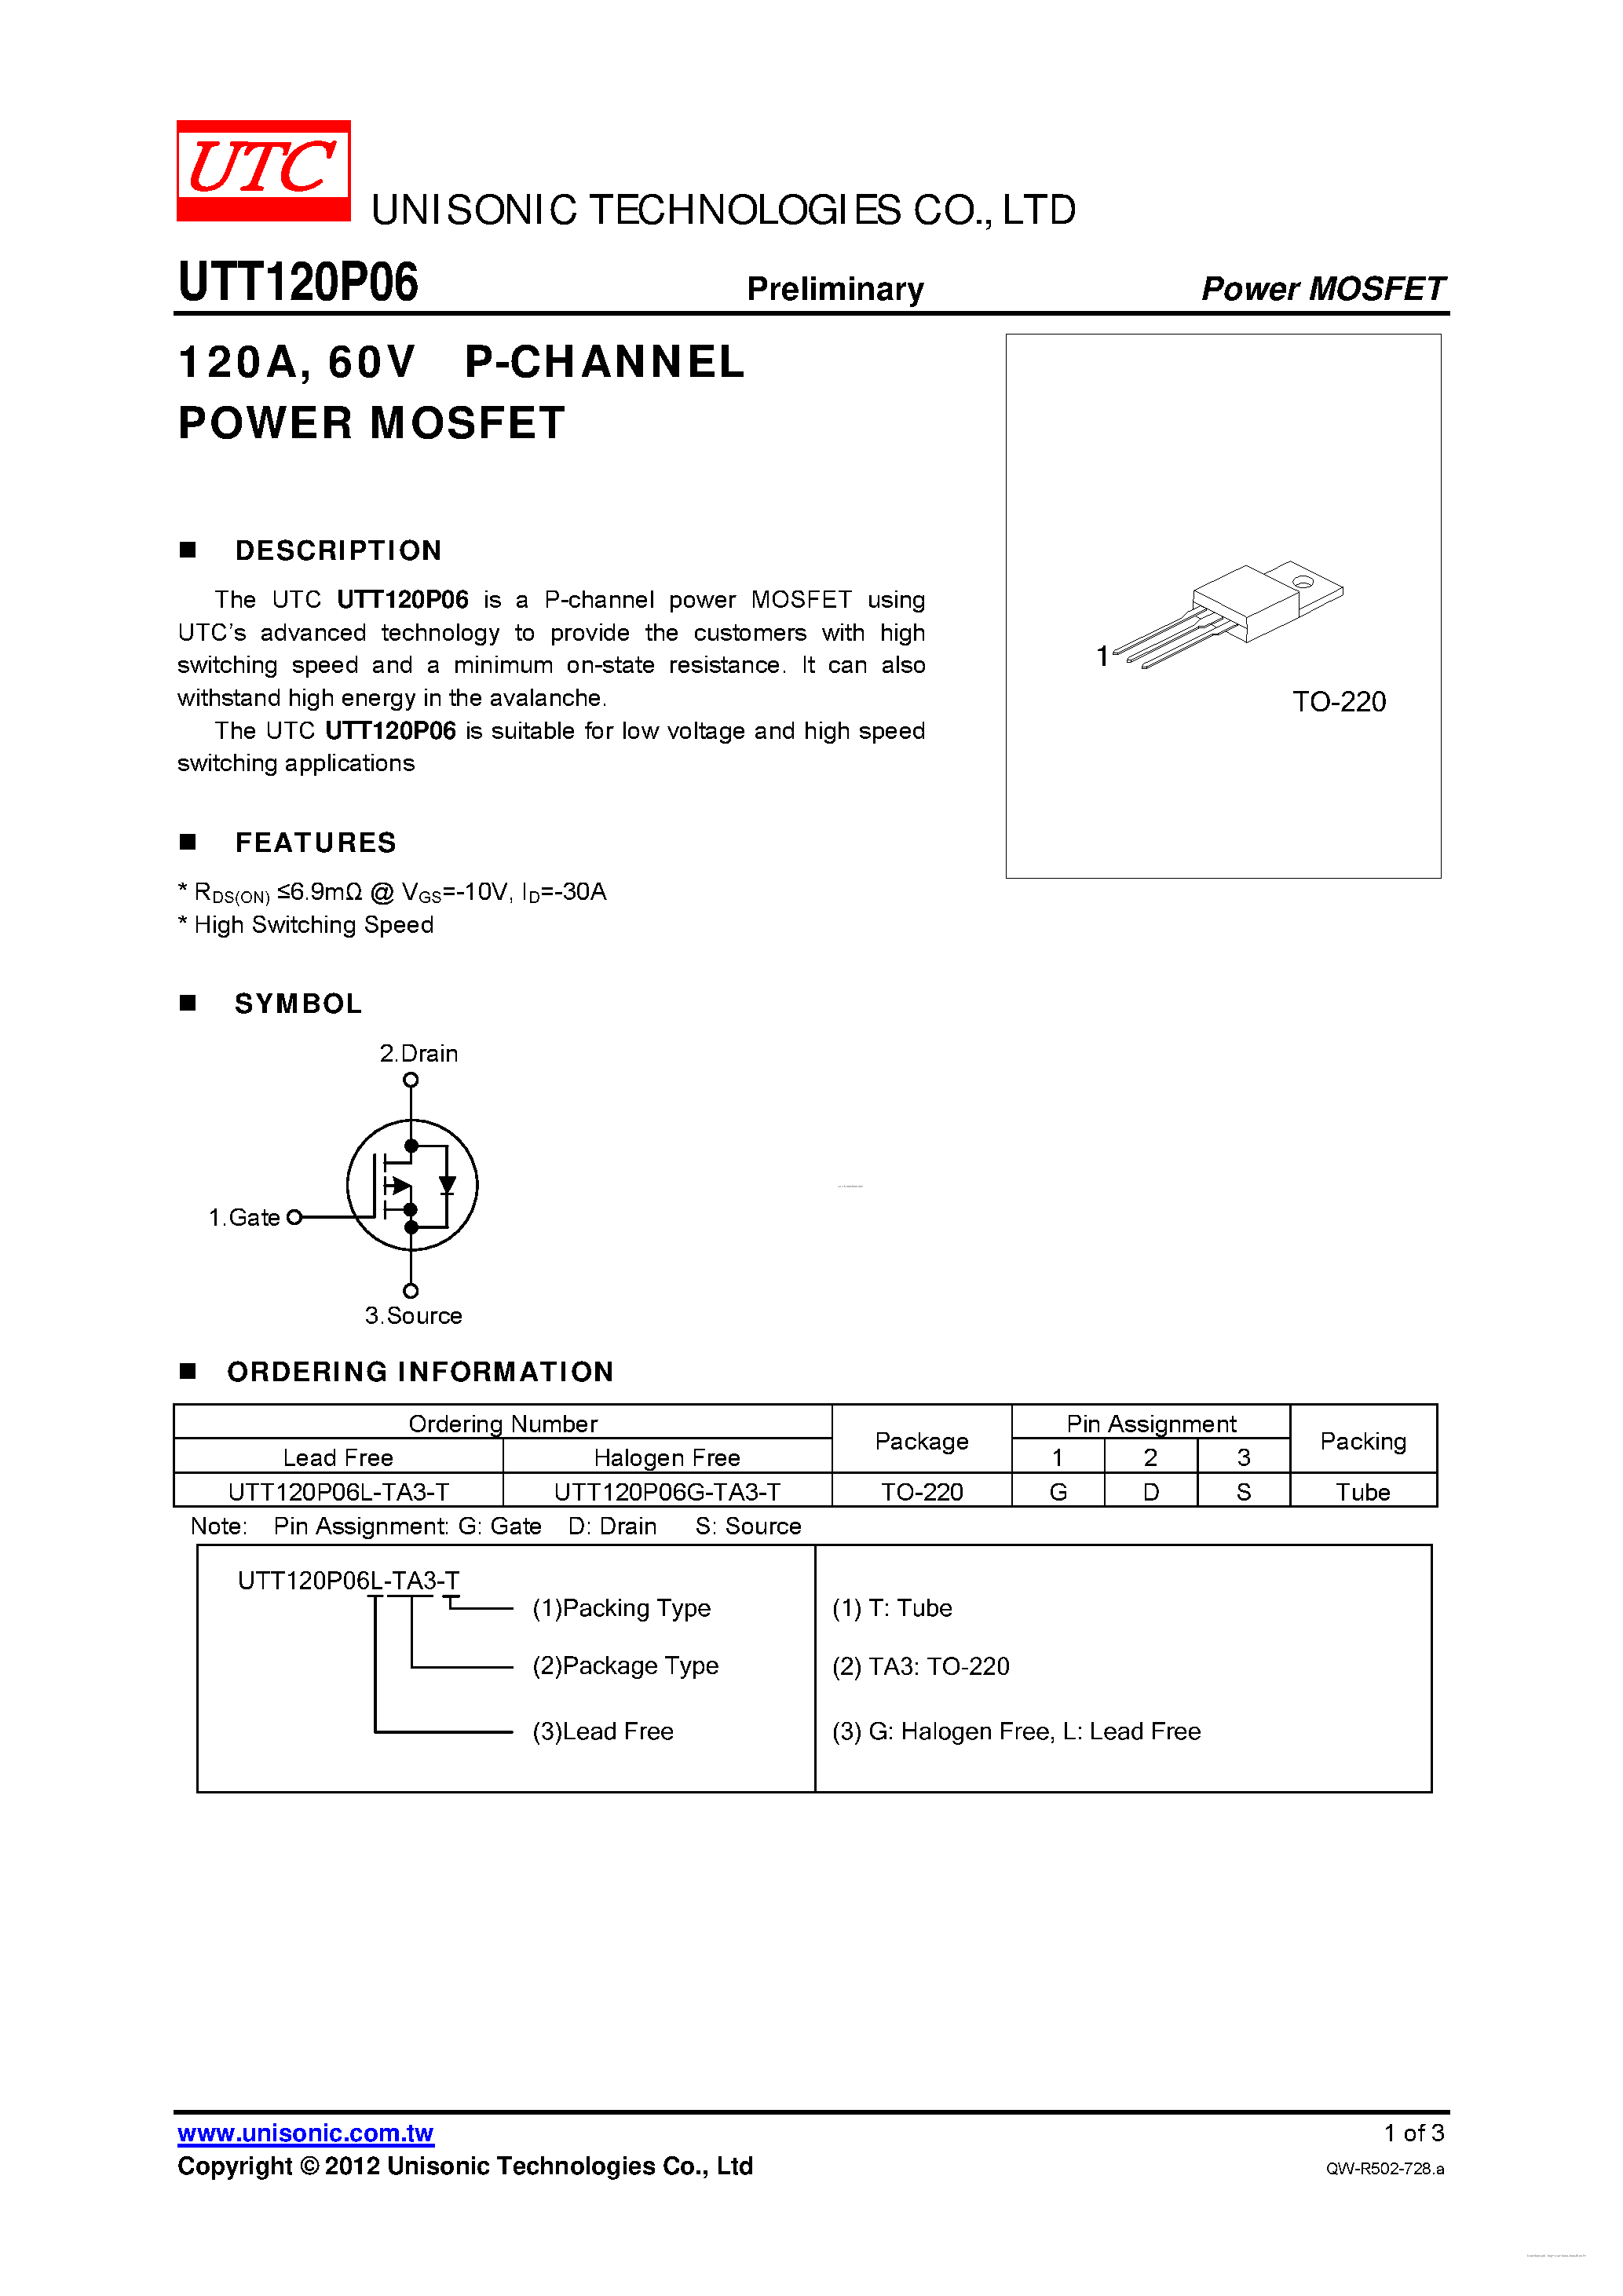 Datasheet UTT120P06 - P-CHANNEL POWER MOSFET page 1